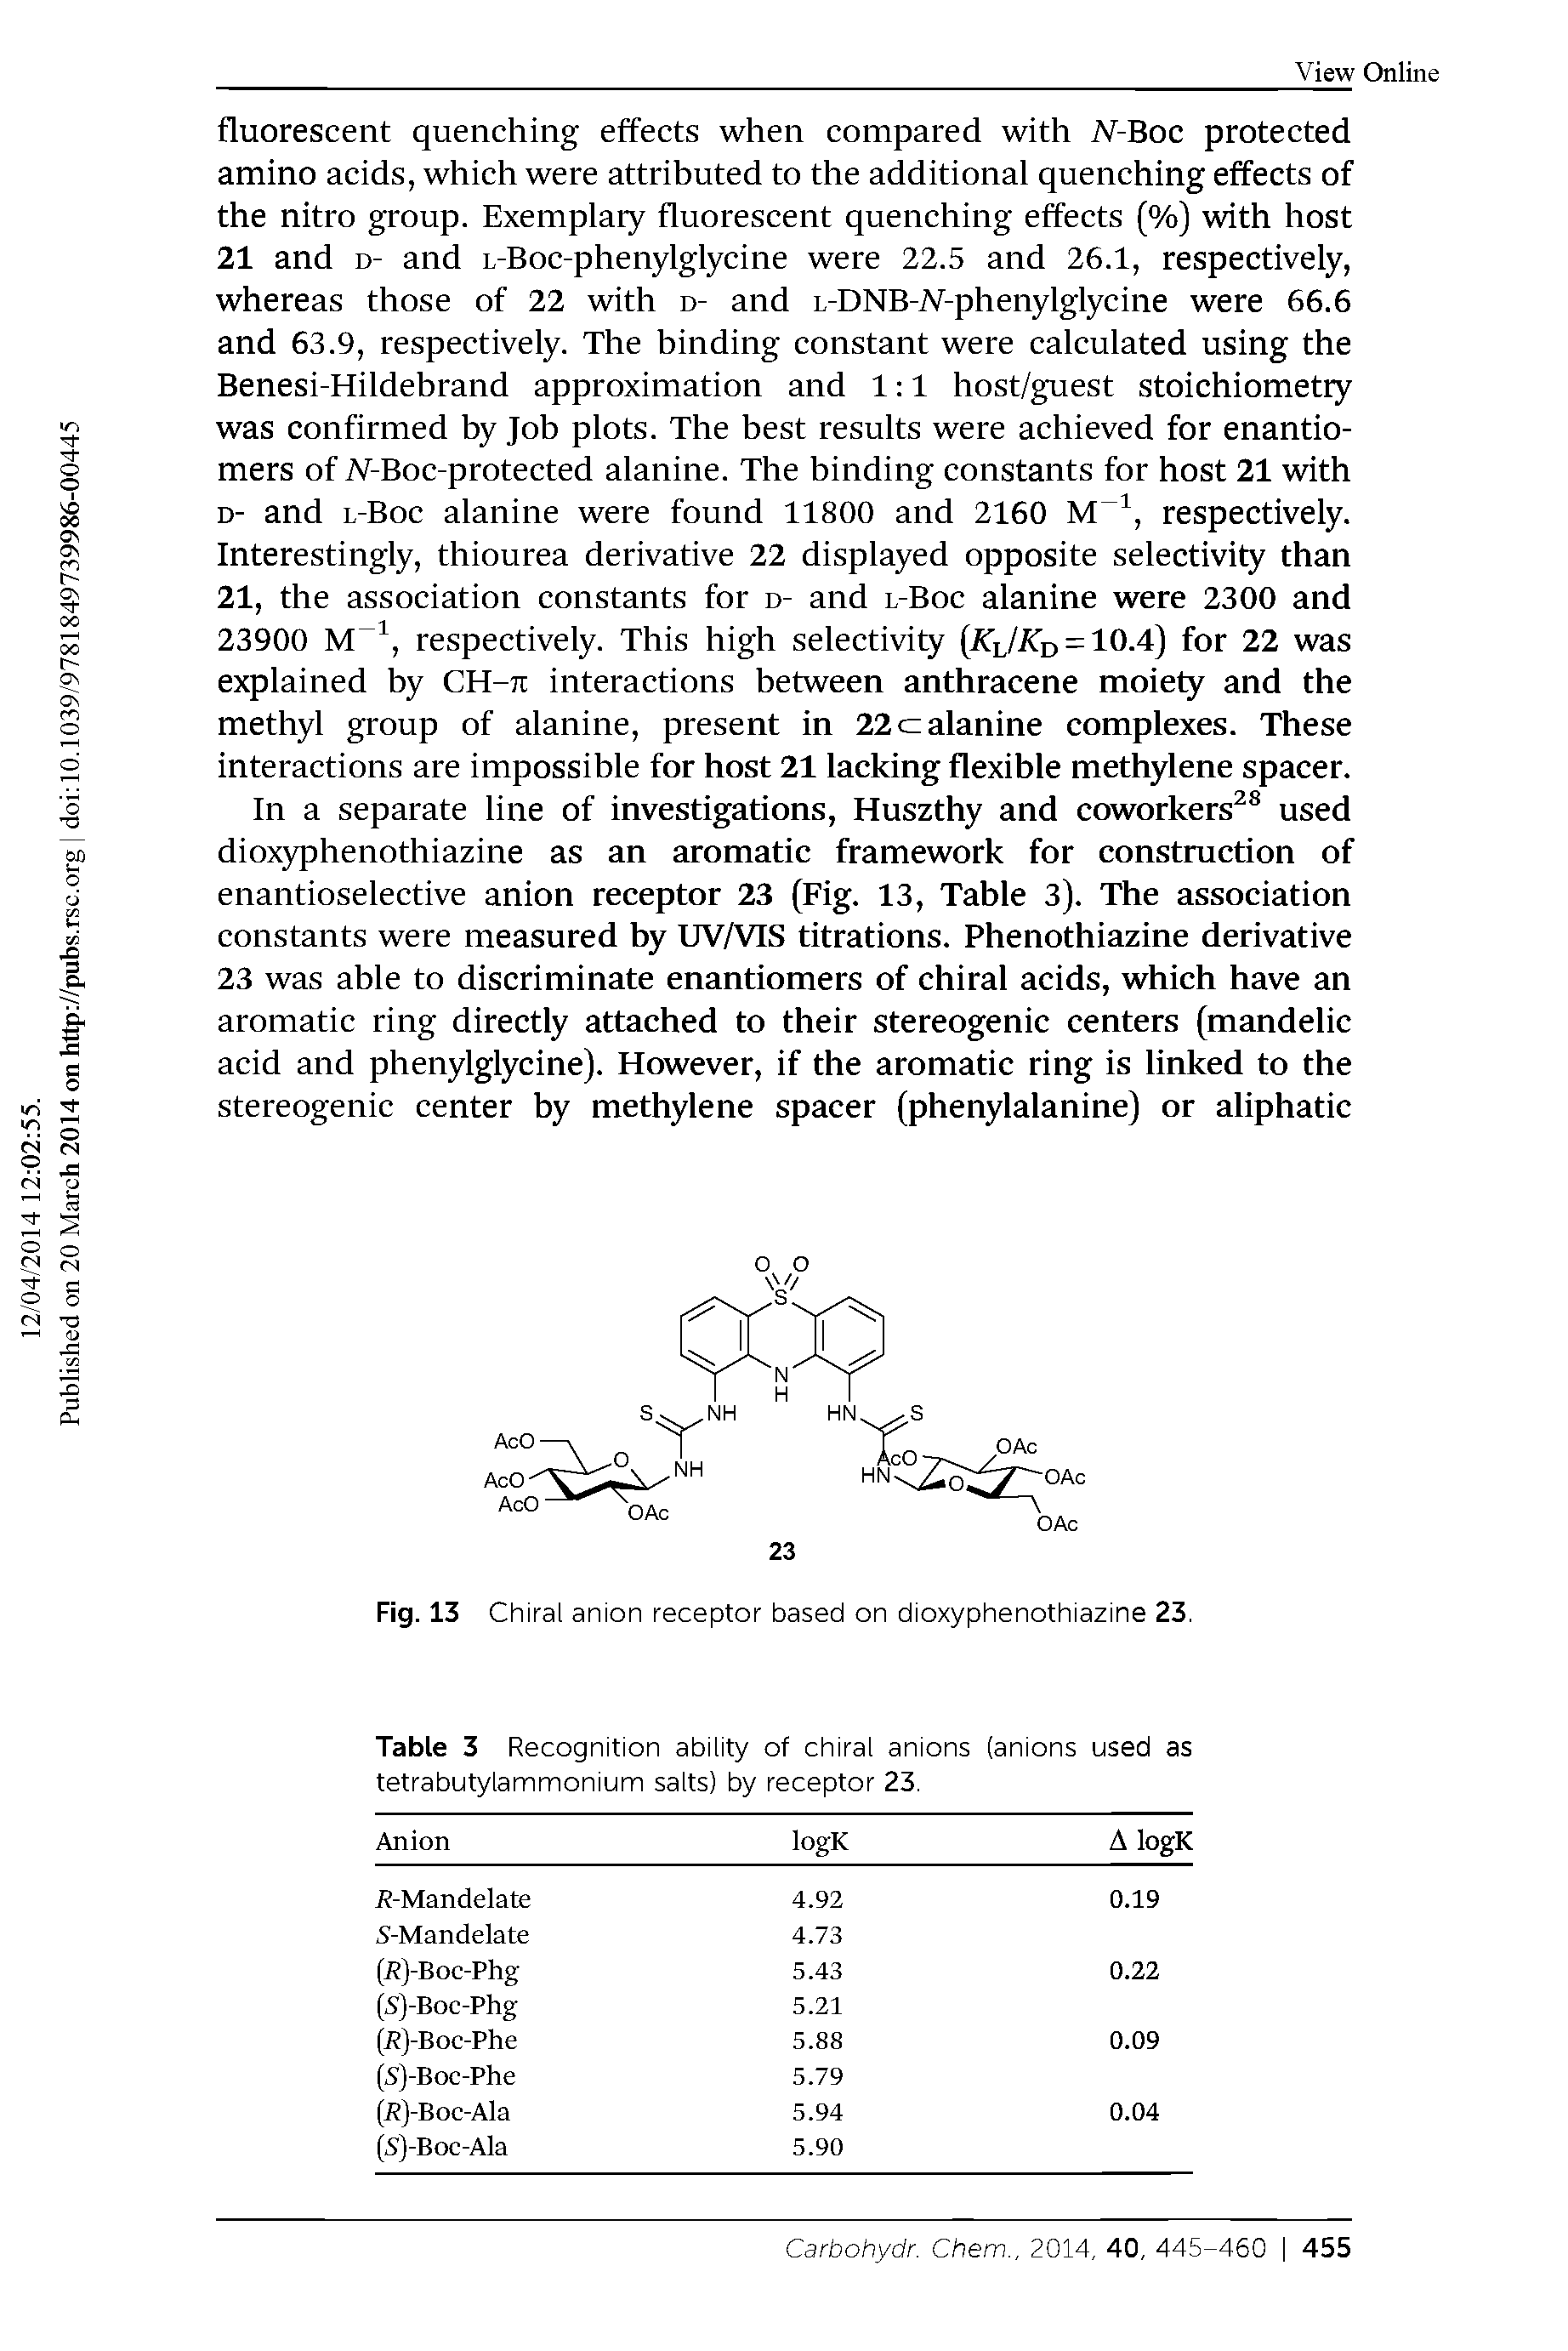 Table 3 Recognition ability of chiral anions (anions used as tetrabutylammonium salts) by receptor 23.